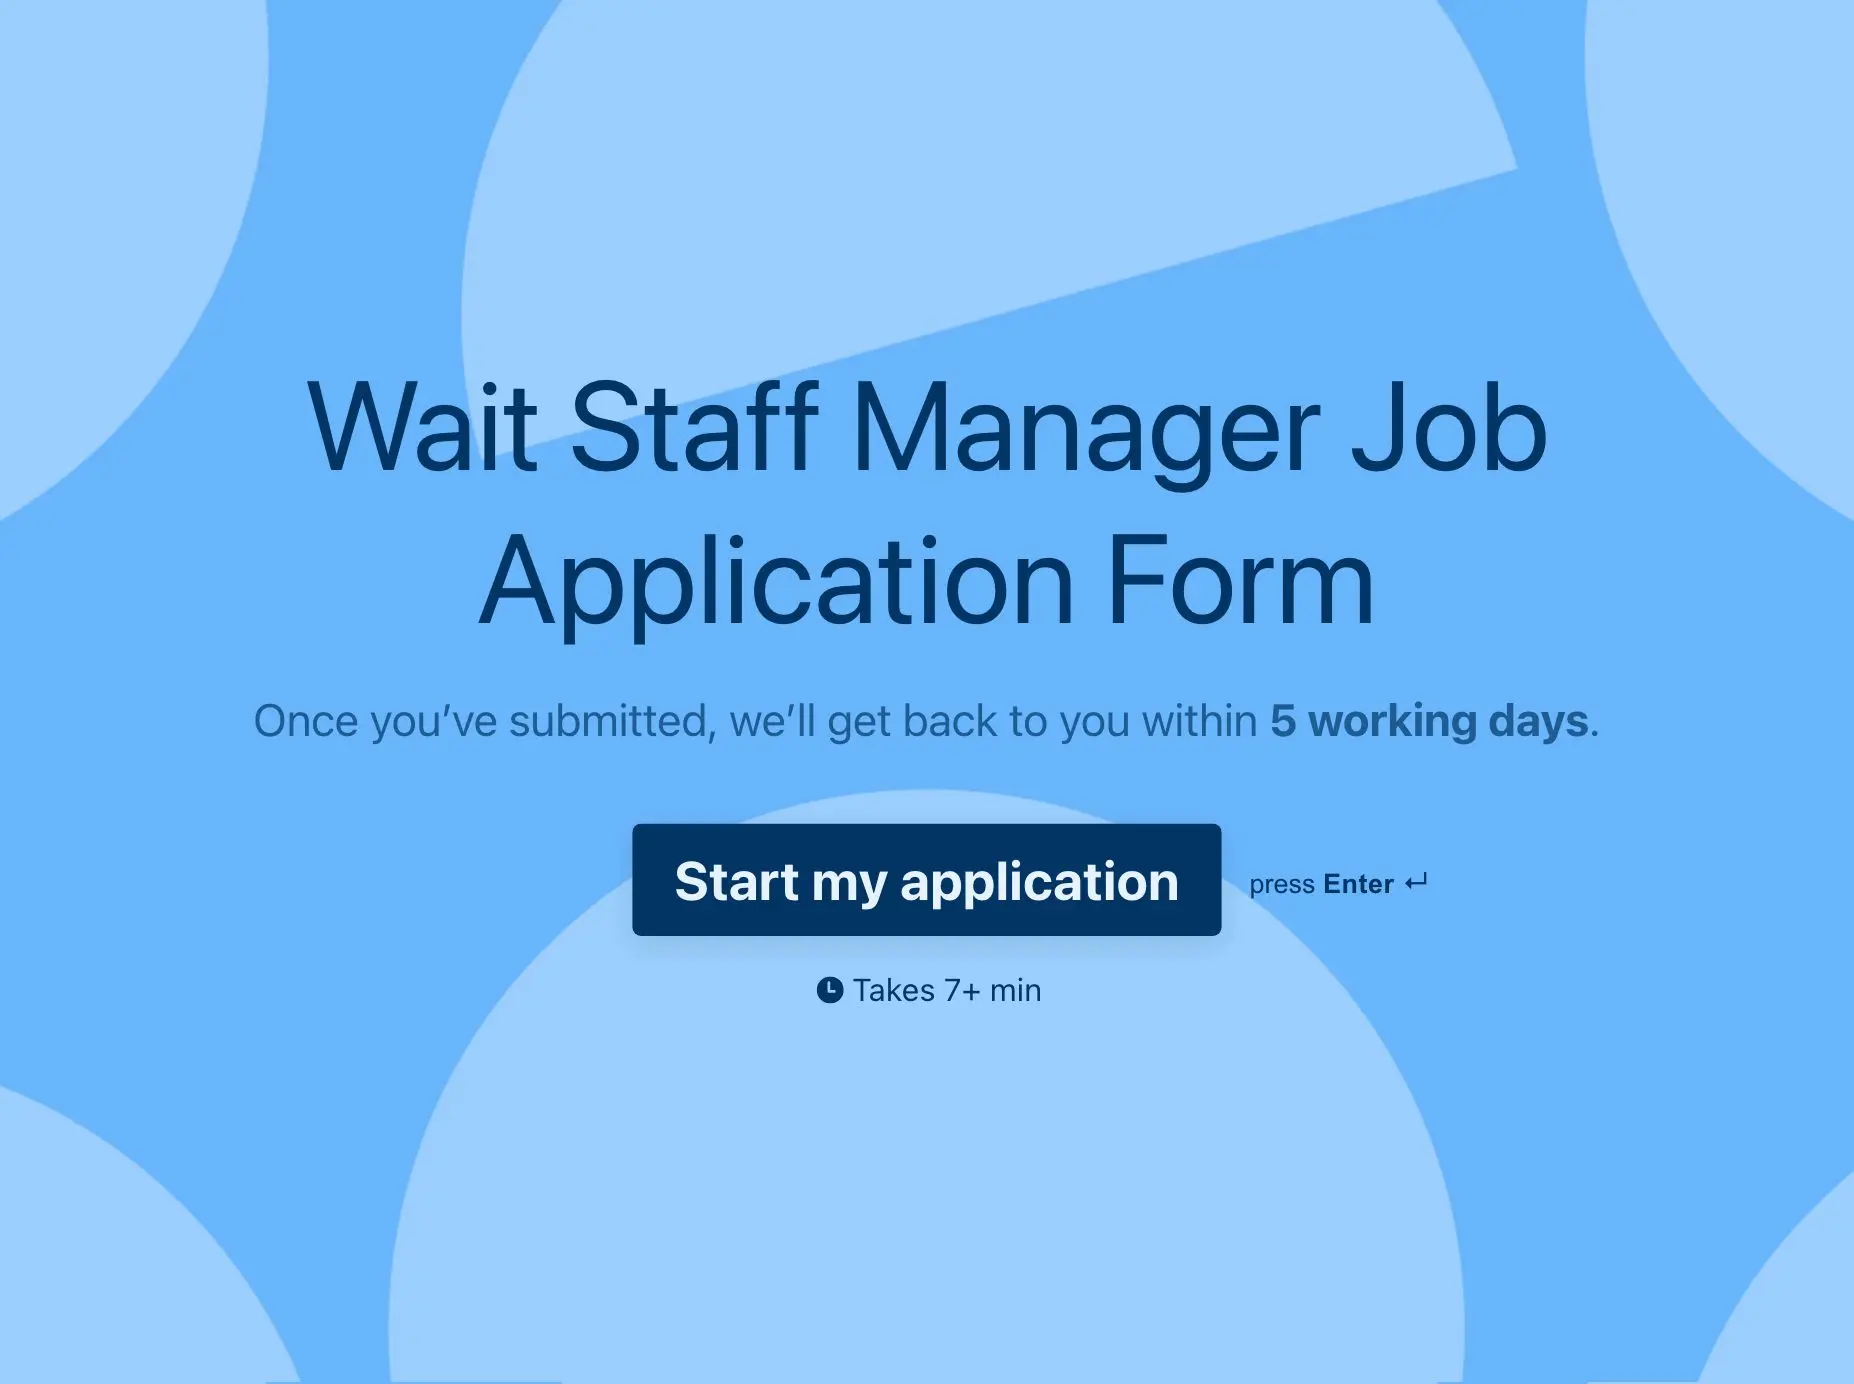 Wait Staff Manager Job Application Form Template Hero